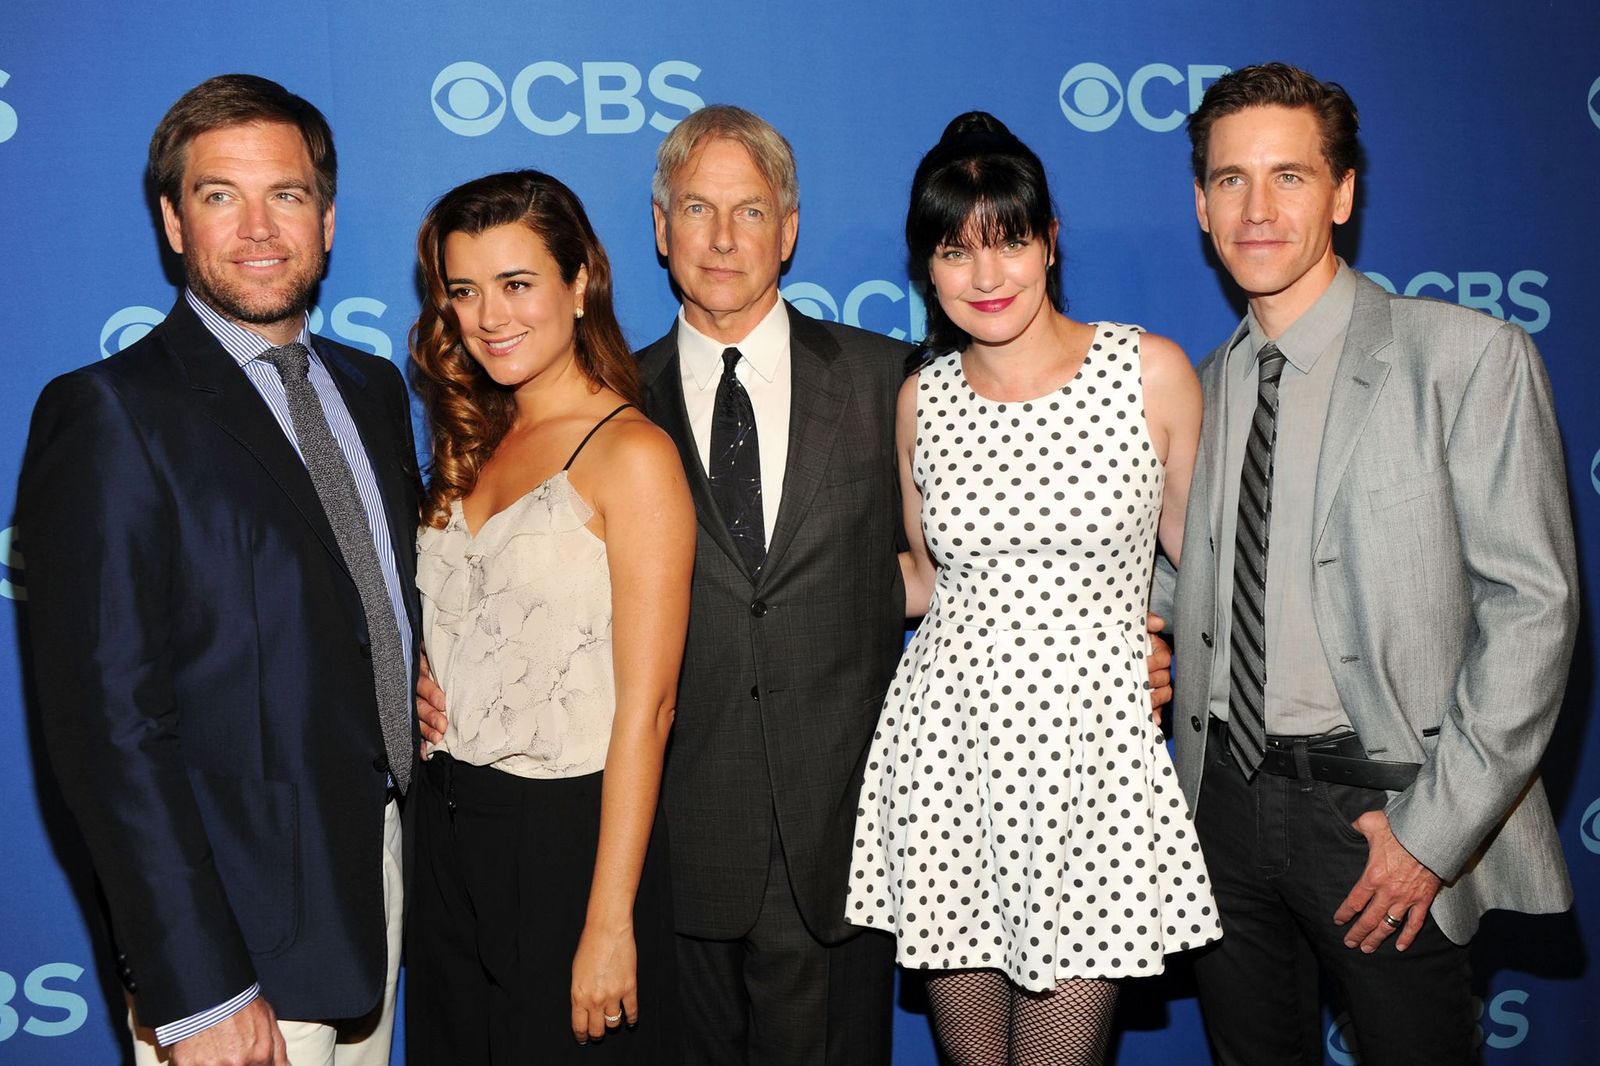 Cast of NCIS Michael Weatherly, Cote de Pable, Mark Harmon, Pauley Perrette and Brian Dietzen at CBS 2013 Upfront Presentation at The Tent at Lincoln Center on May 15, 2013 in New York City | Photo: Getty Images